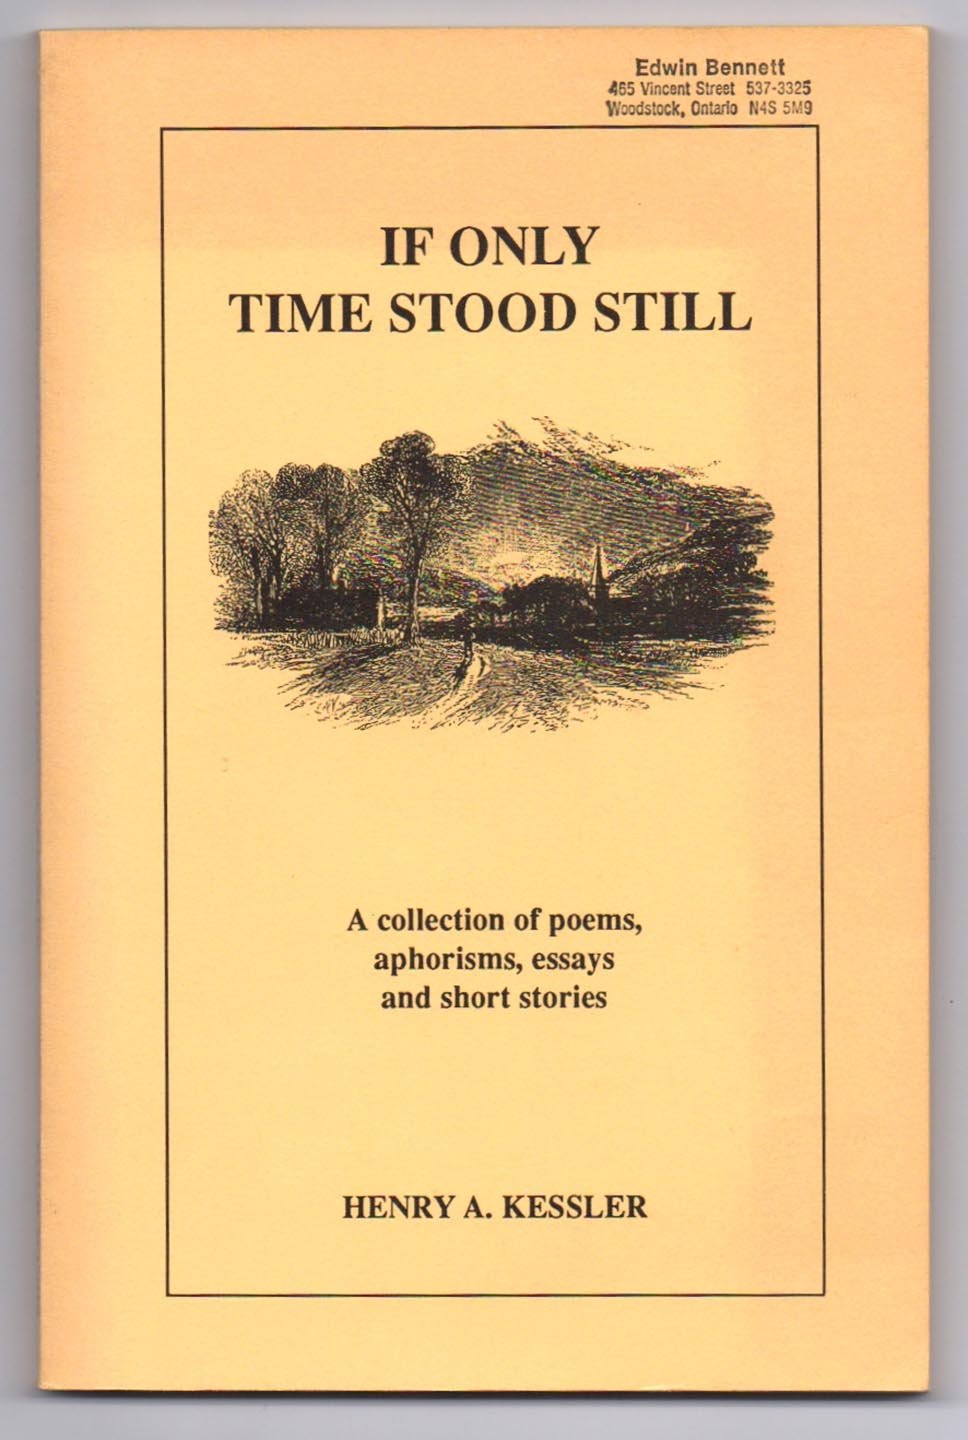 If Only Time Stood Still: A Collection of Poems, Aphorisms, Essays and Short Stories